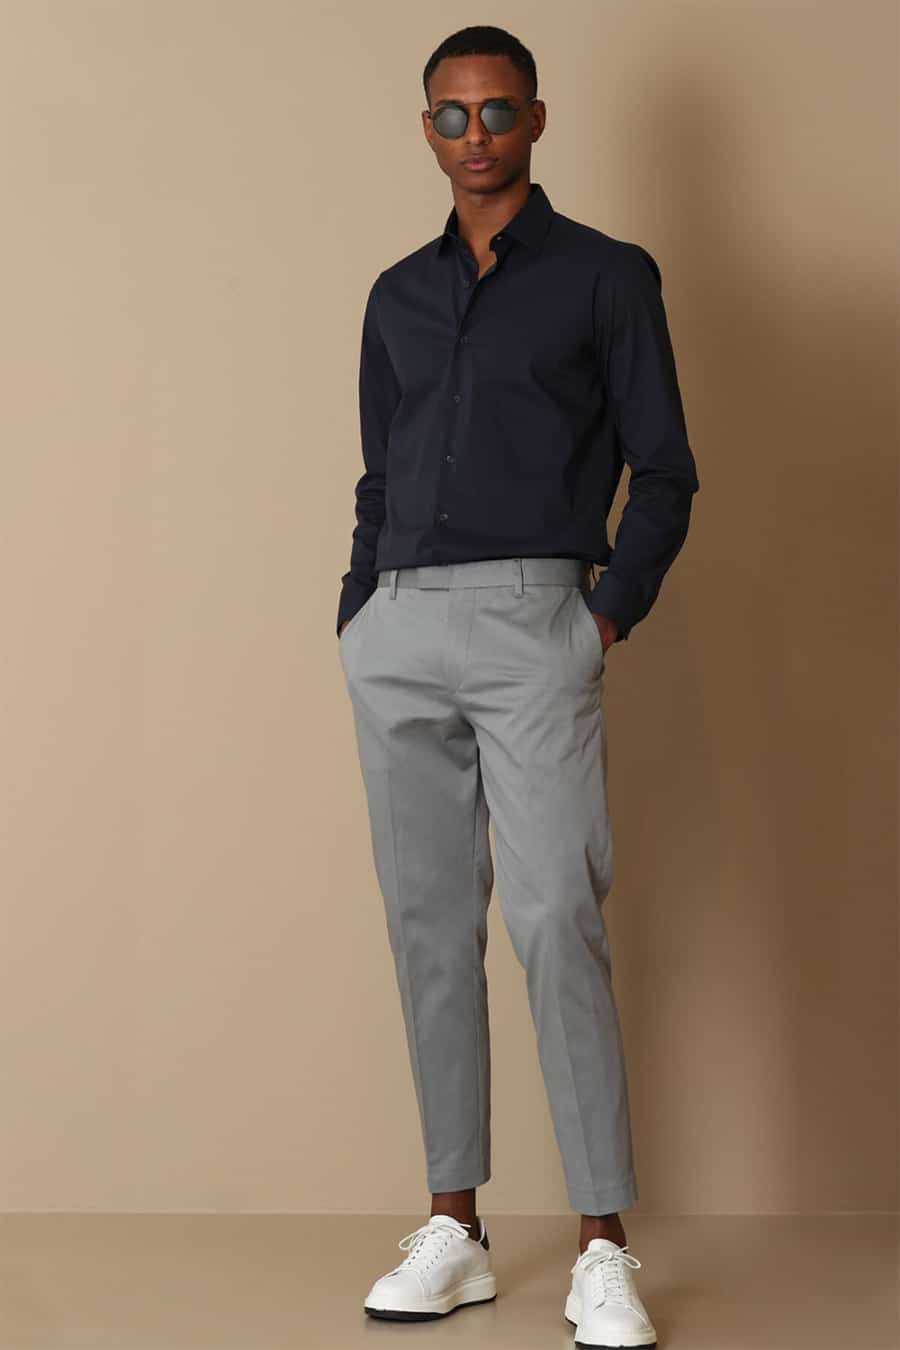 Men's gcropped grey pants, navy dress shirt and white sneakers outfit